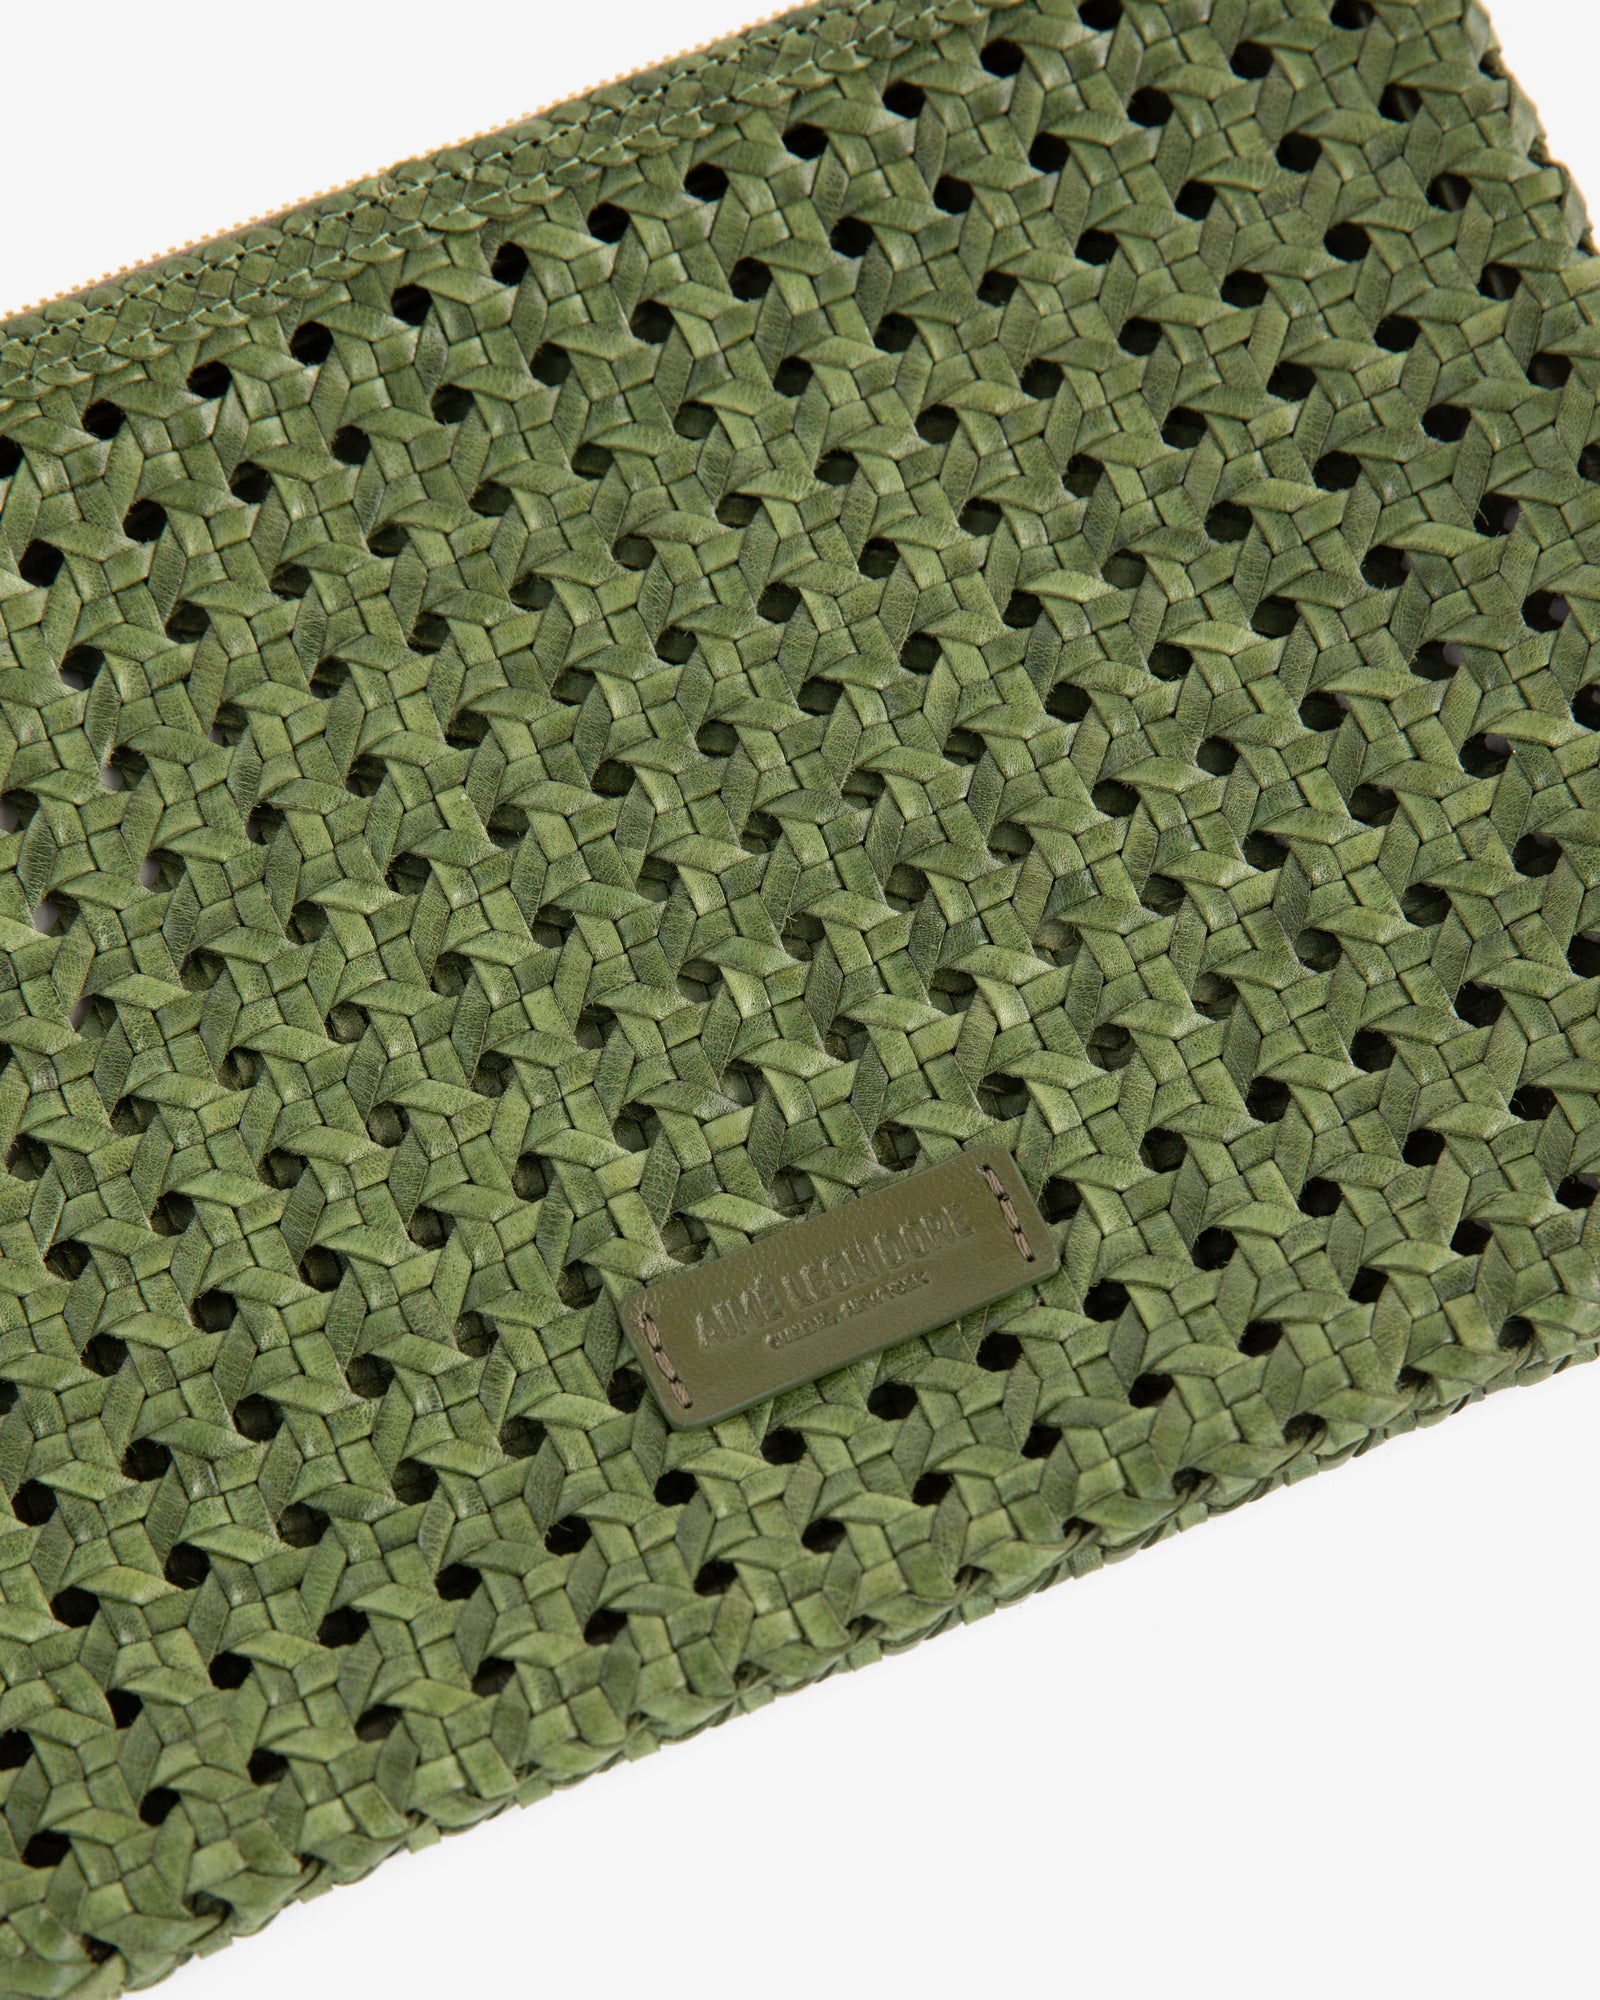 Woven Leather Pouch